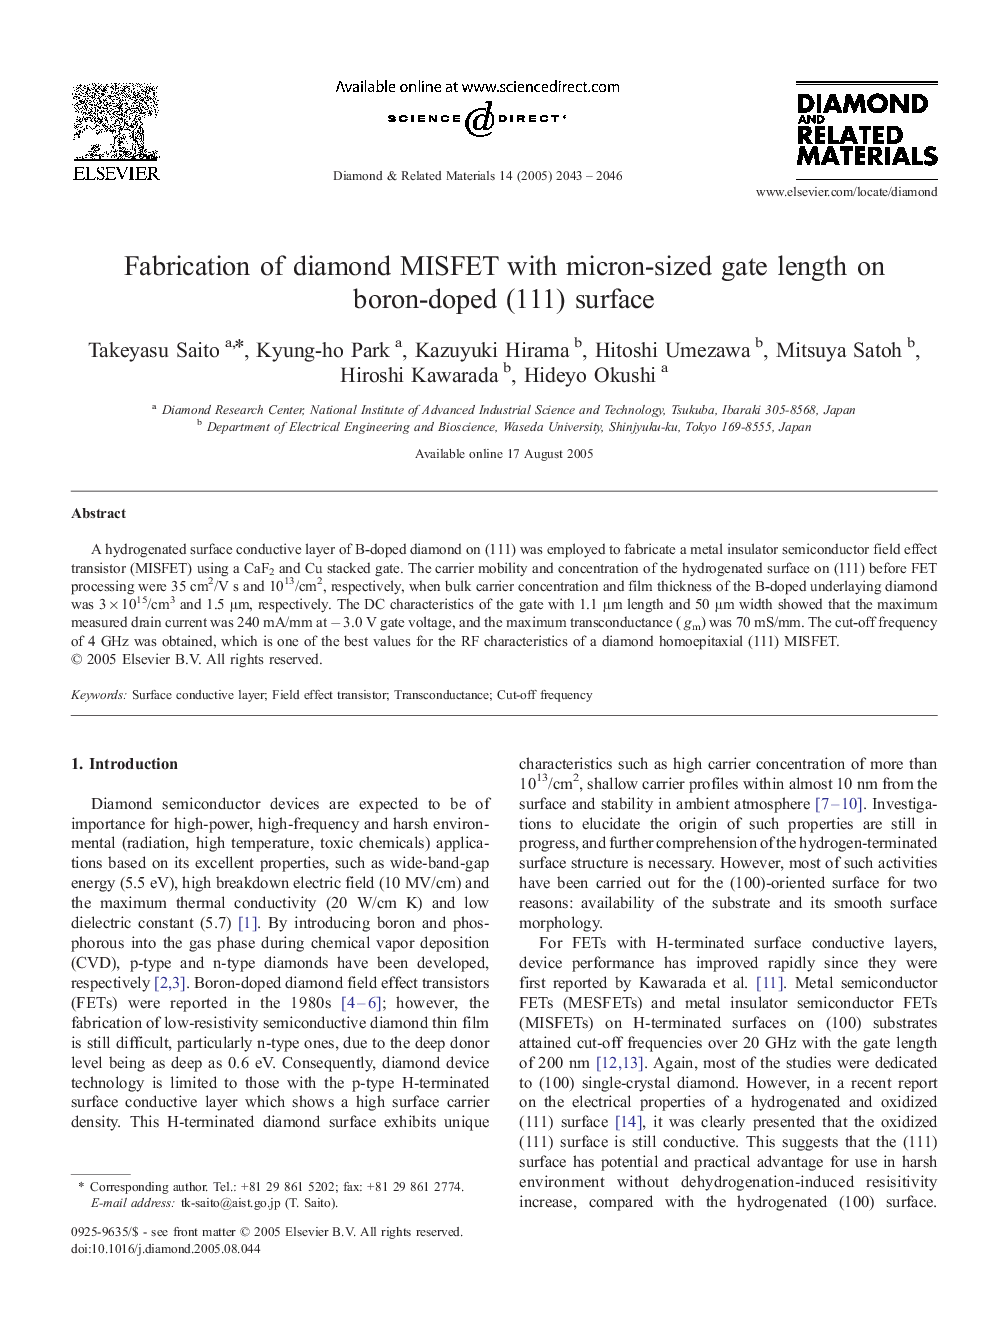 Fabrication of diamond MISFET with micron-sized gate length on boron-doped (111) surface